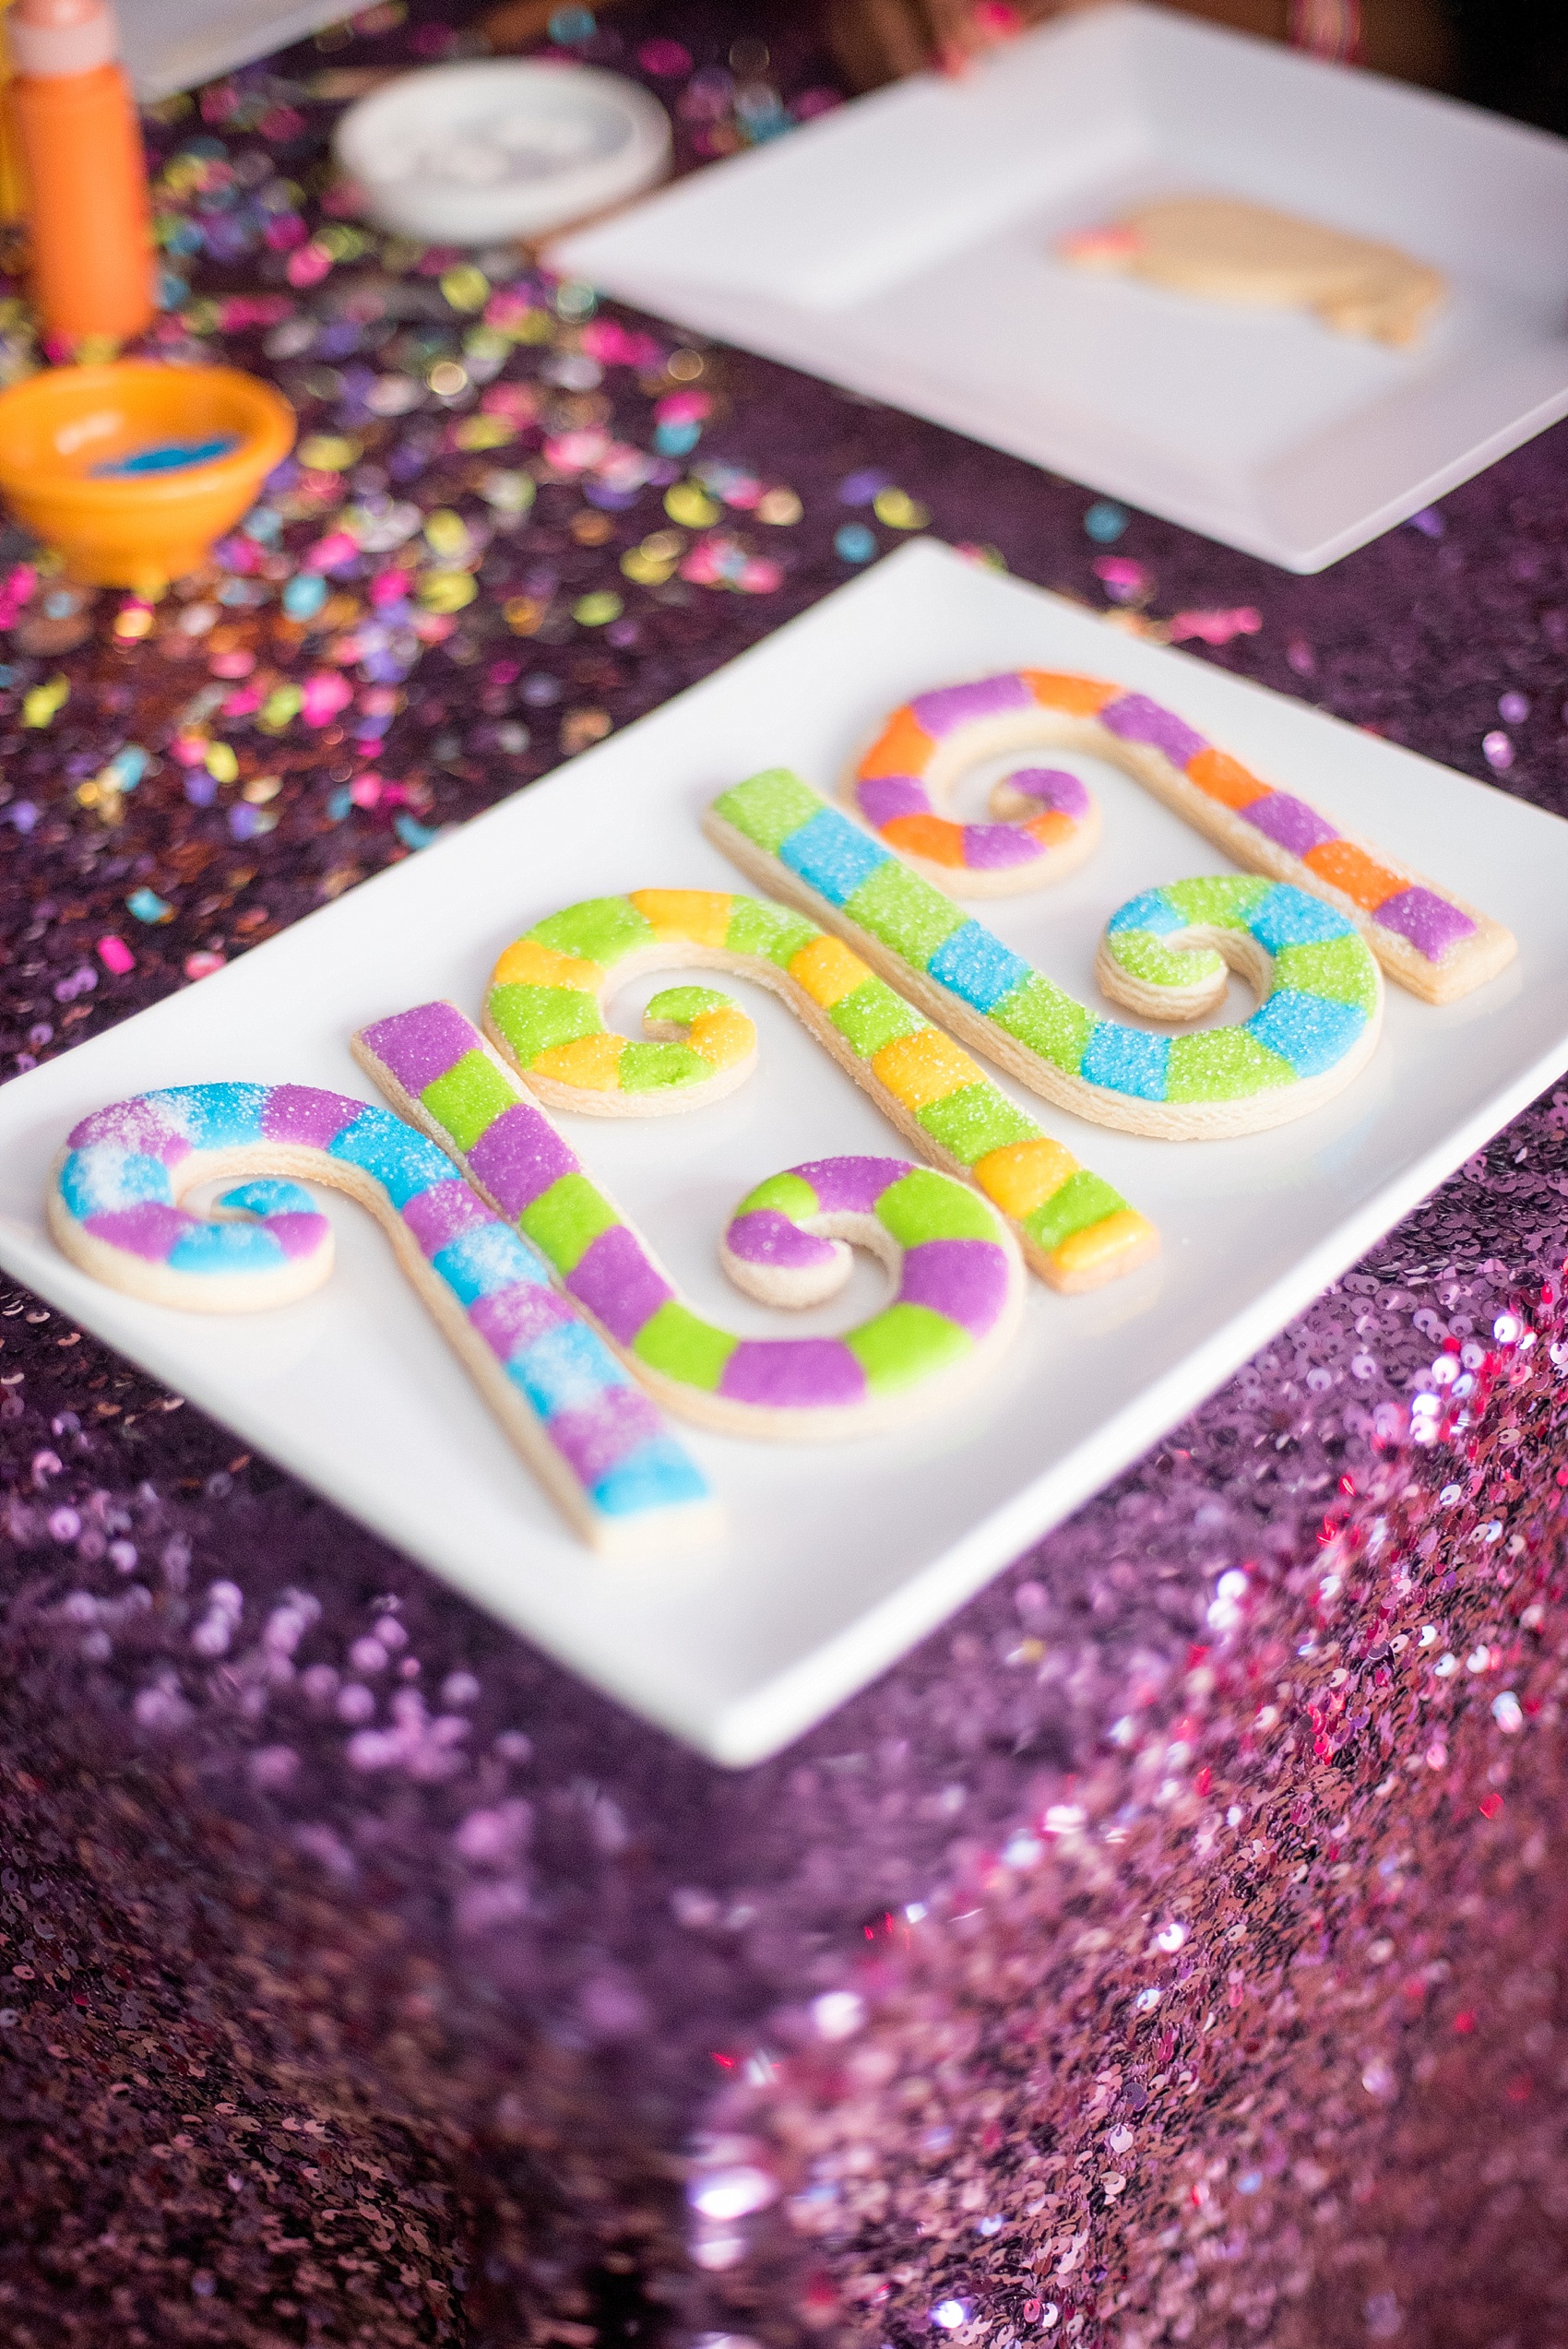 Mikkel Paige Photography photo of a holiday party with a Lisa Frank theme, girlfriend party, with cookie decorating idea, including royal, colorful icing.